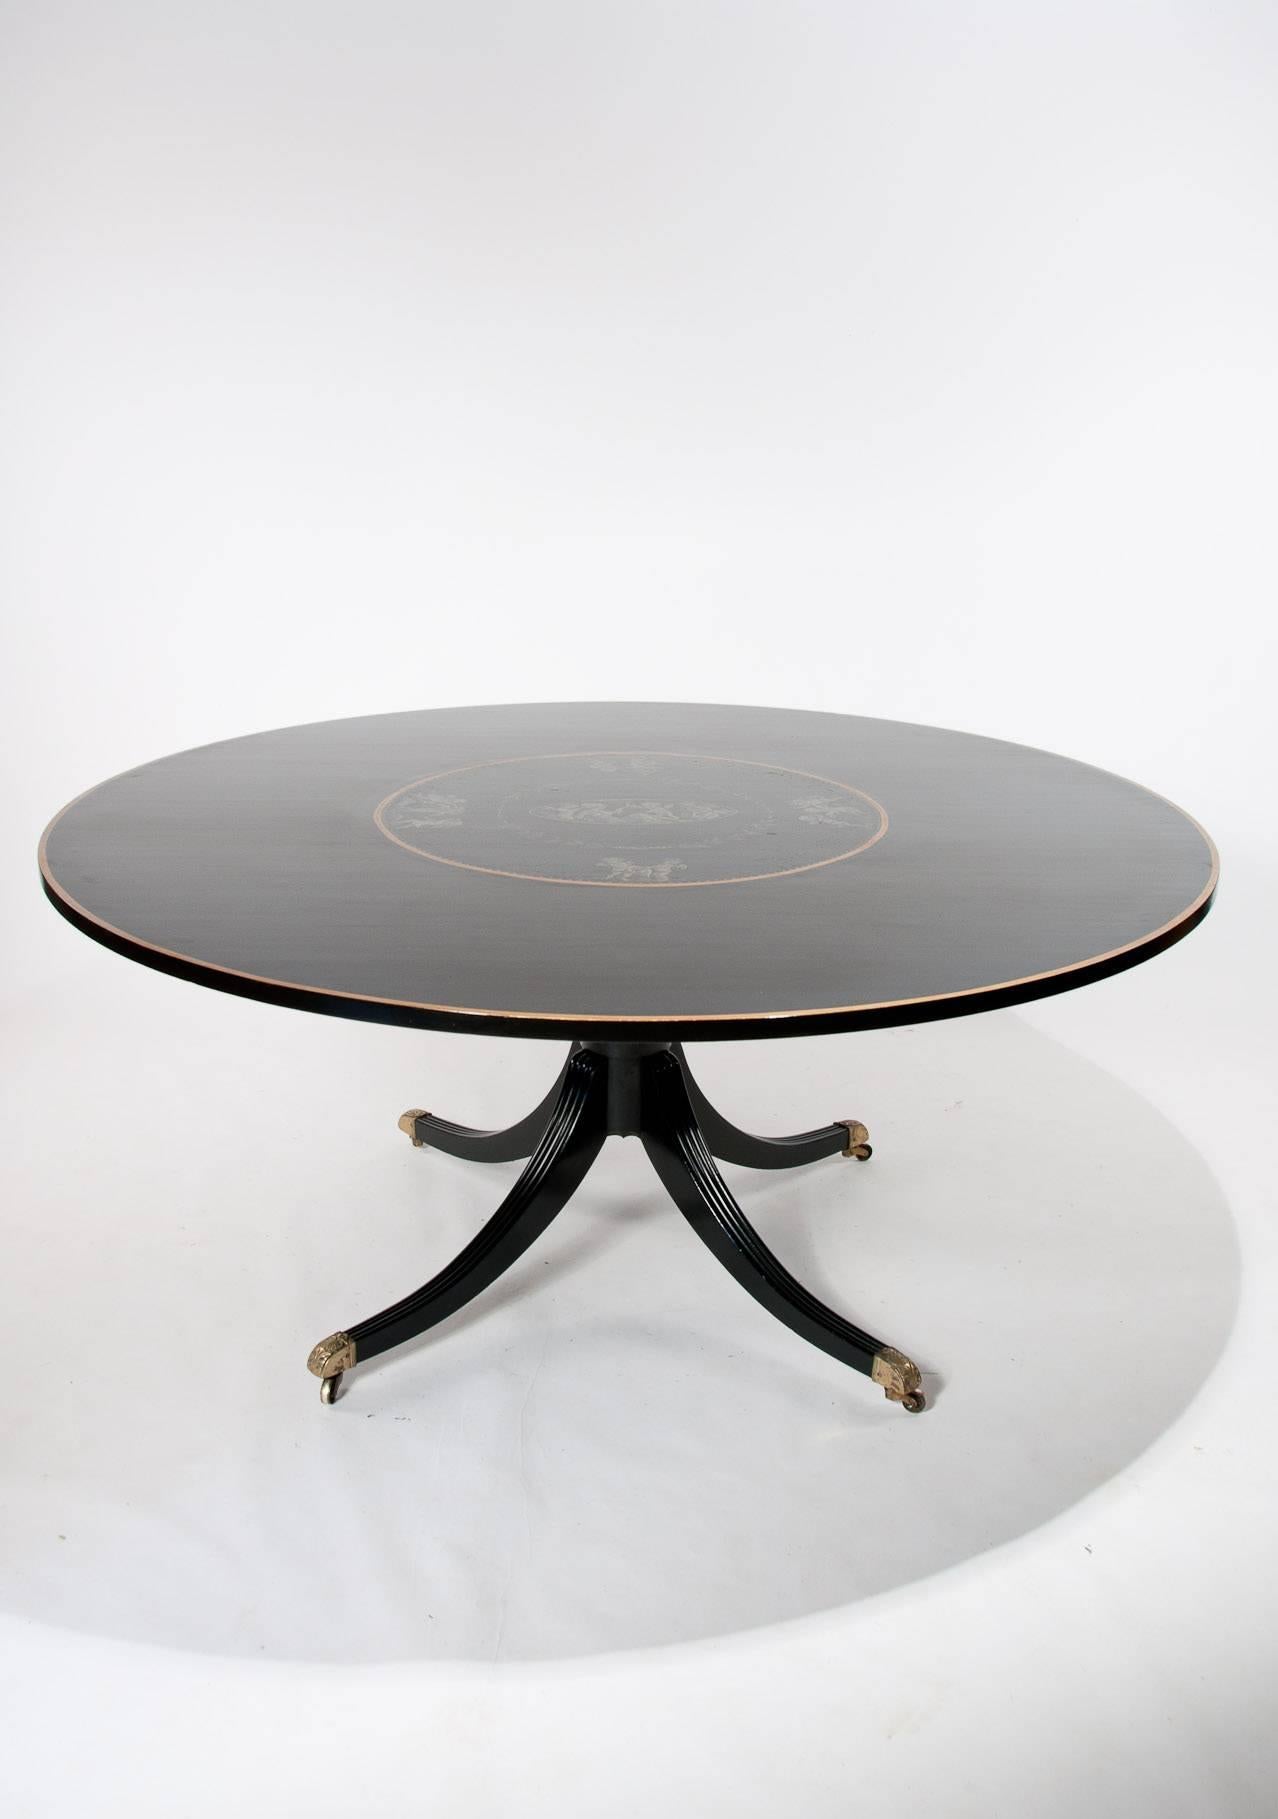 A large 5 1/2 feet round ebonised Hollywood Regency style dining table on central splay base circa 1970-1980s. 
The large 66-inch diameter top having a hand-painted central round of a woman surrounded by cupids enclosed by a gilt round edge